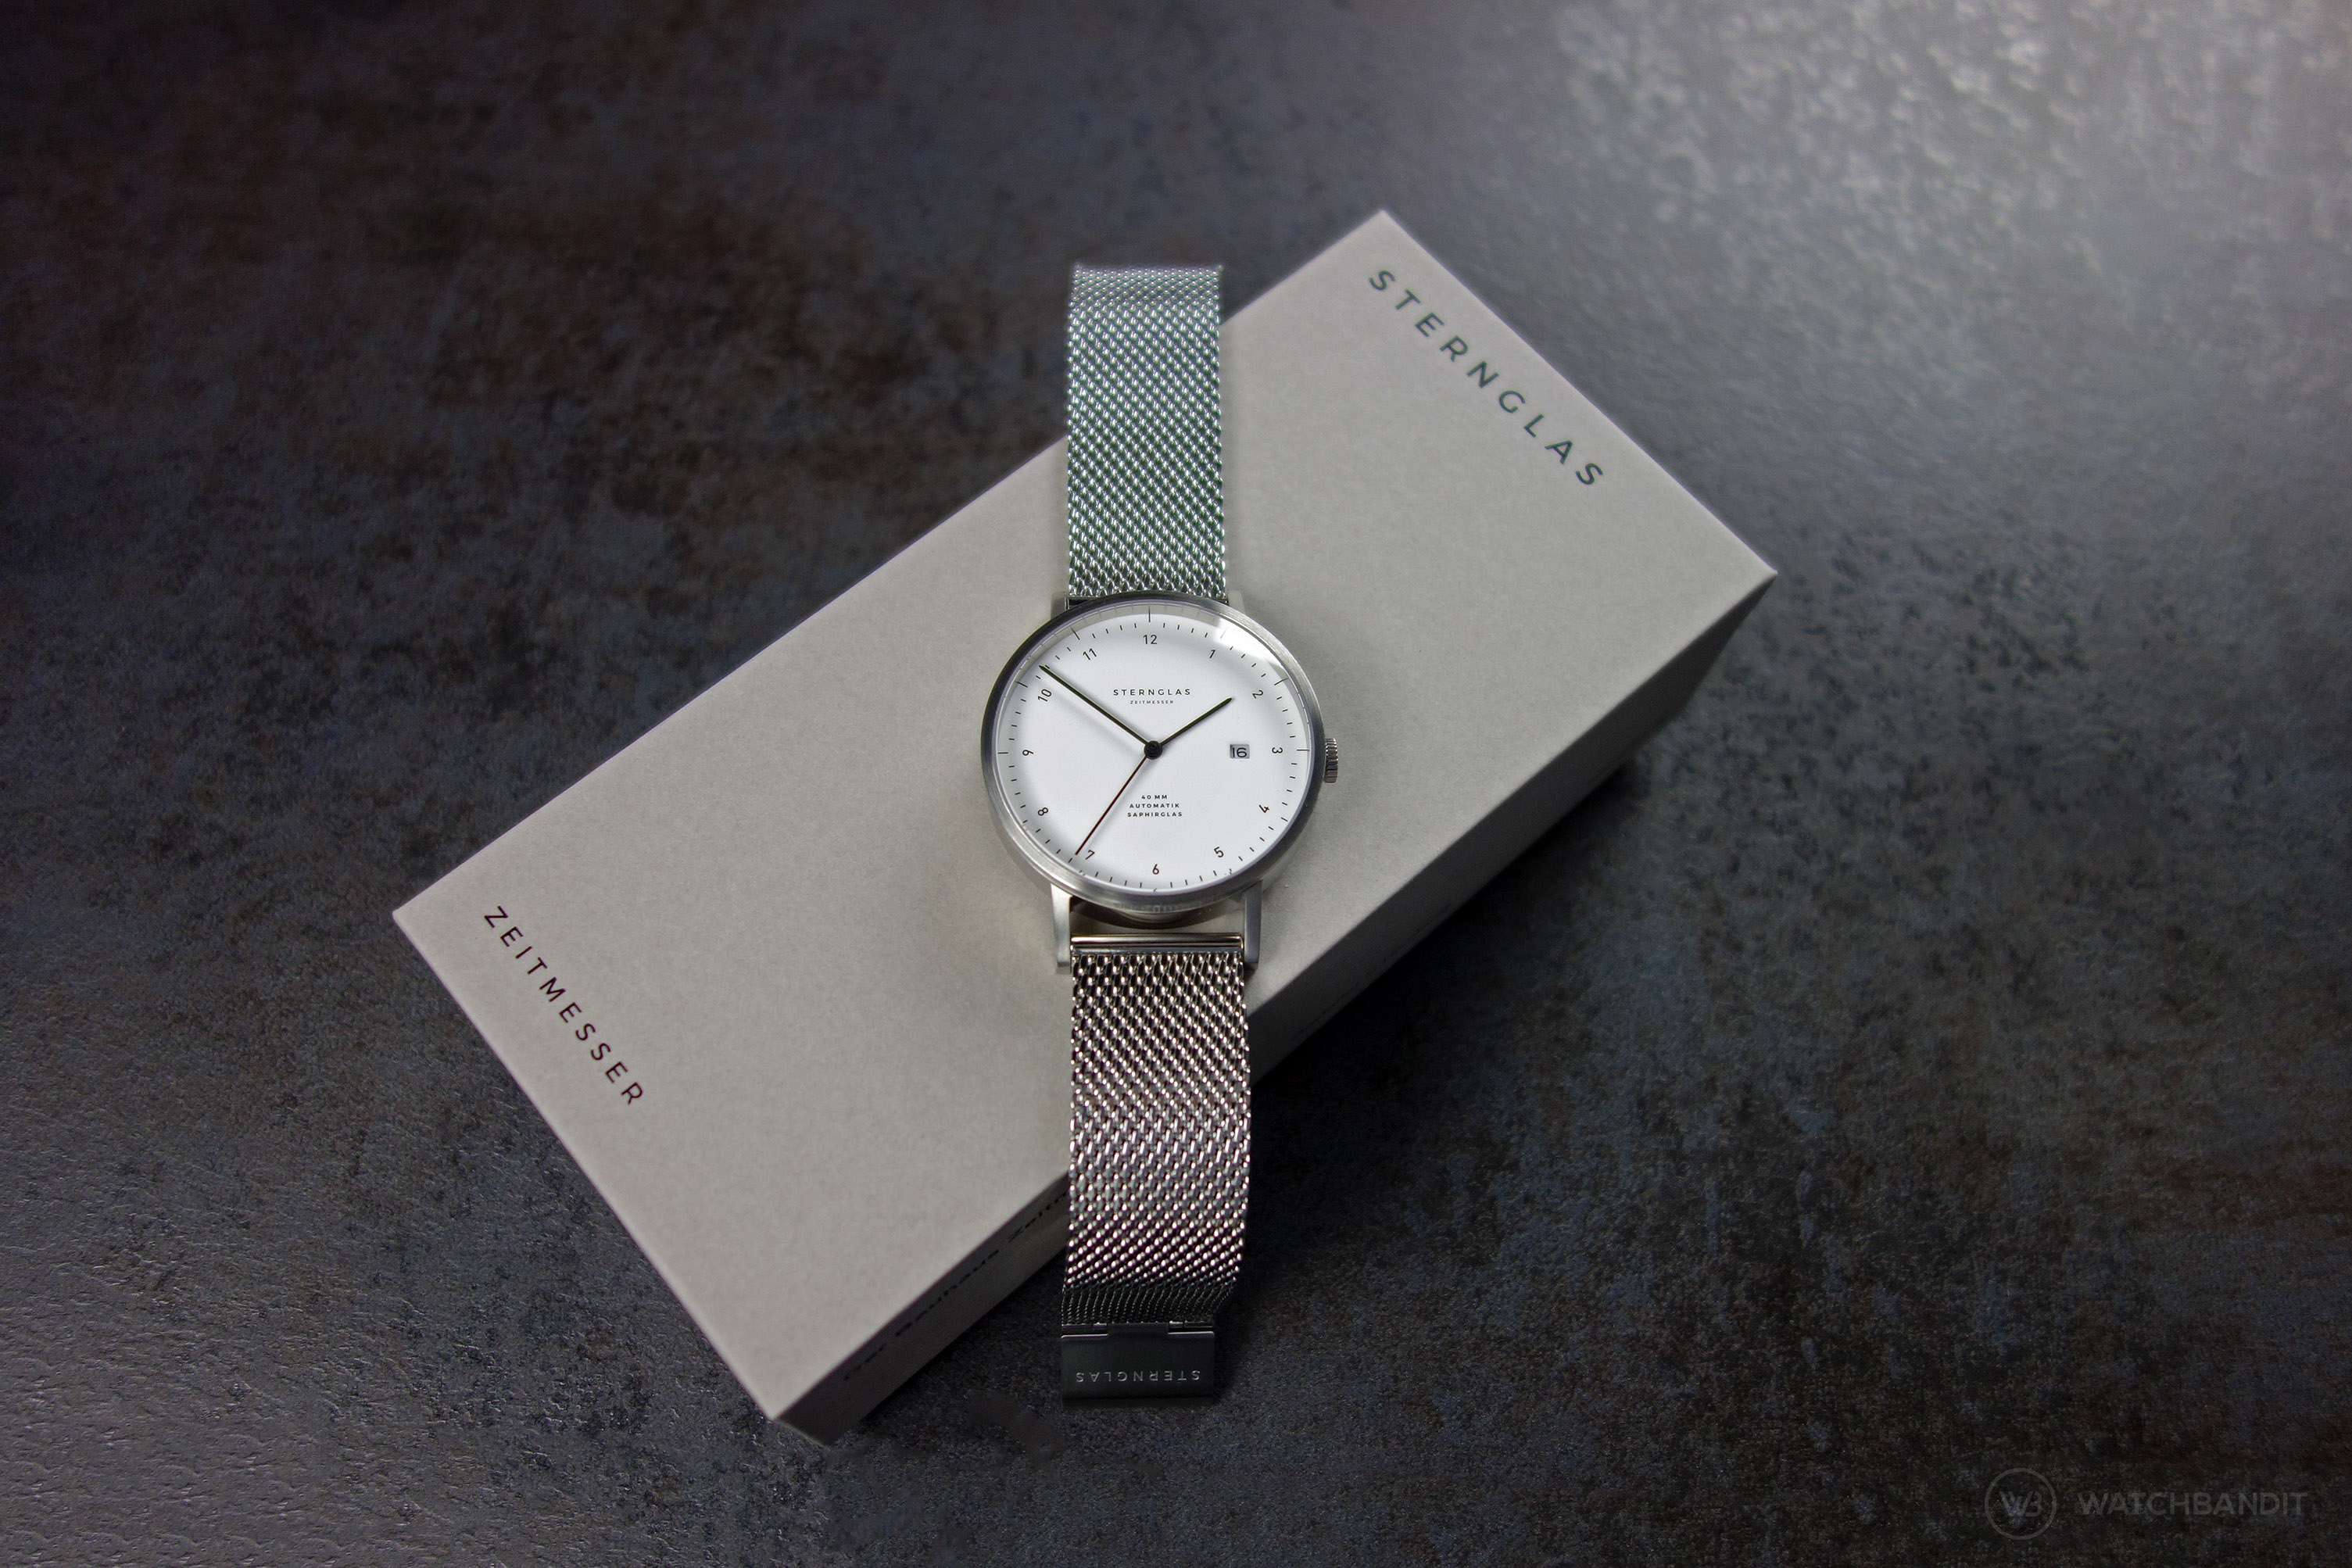 Sternglas Zirkel watch and box